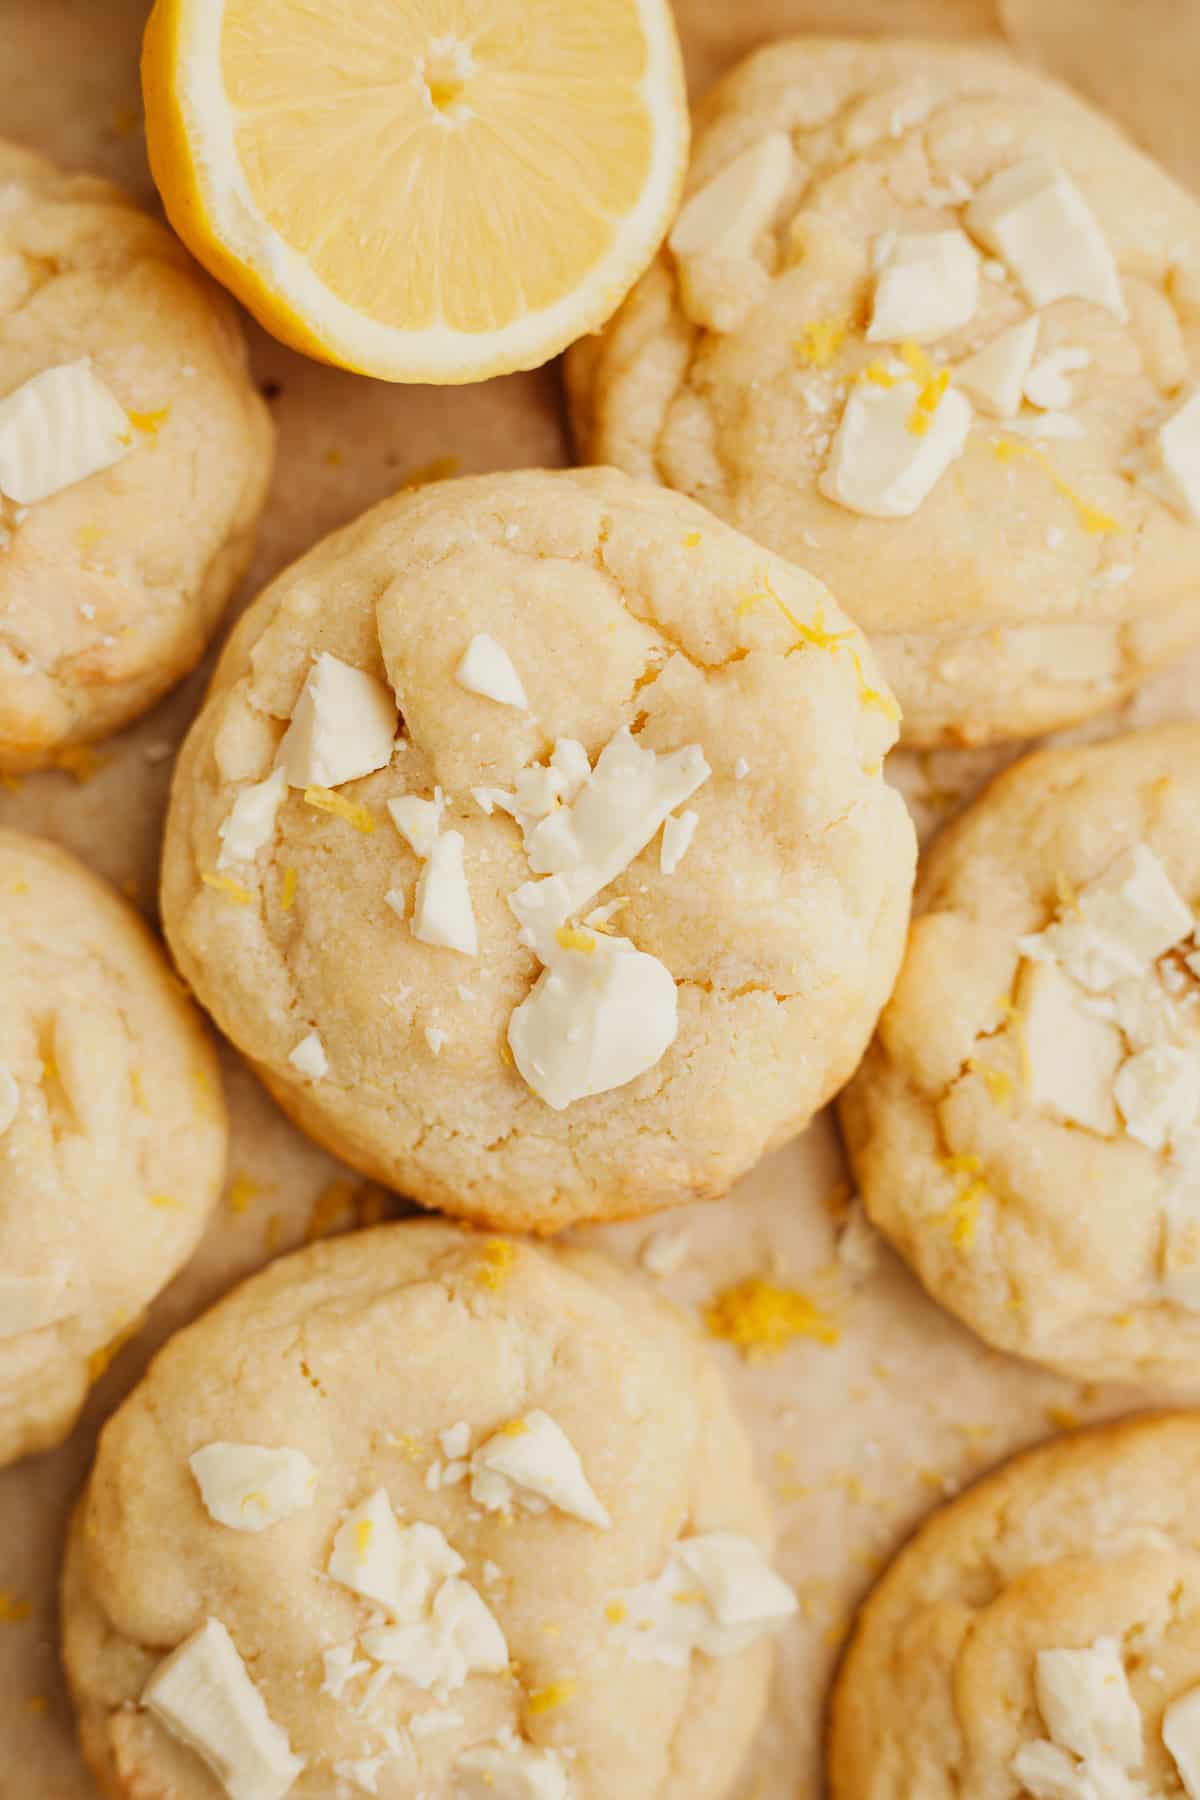 Lemon white chocolate cookies on light brown parchment paper.